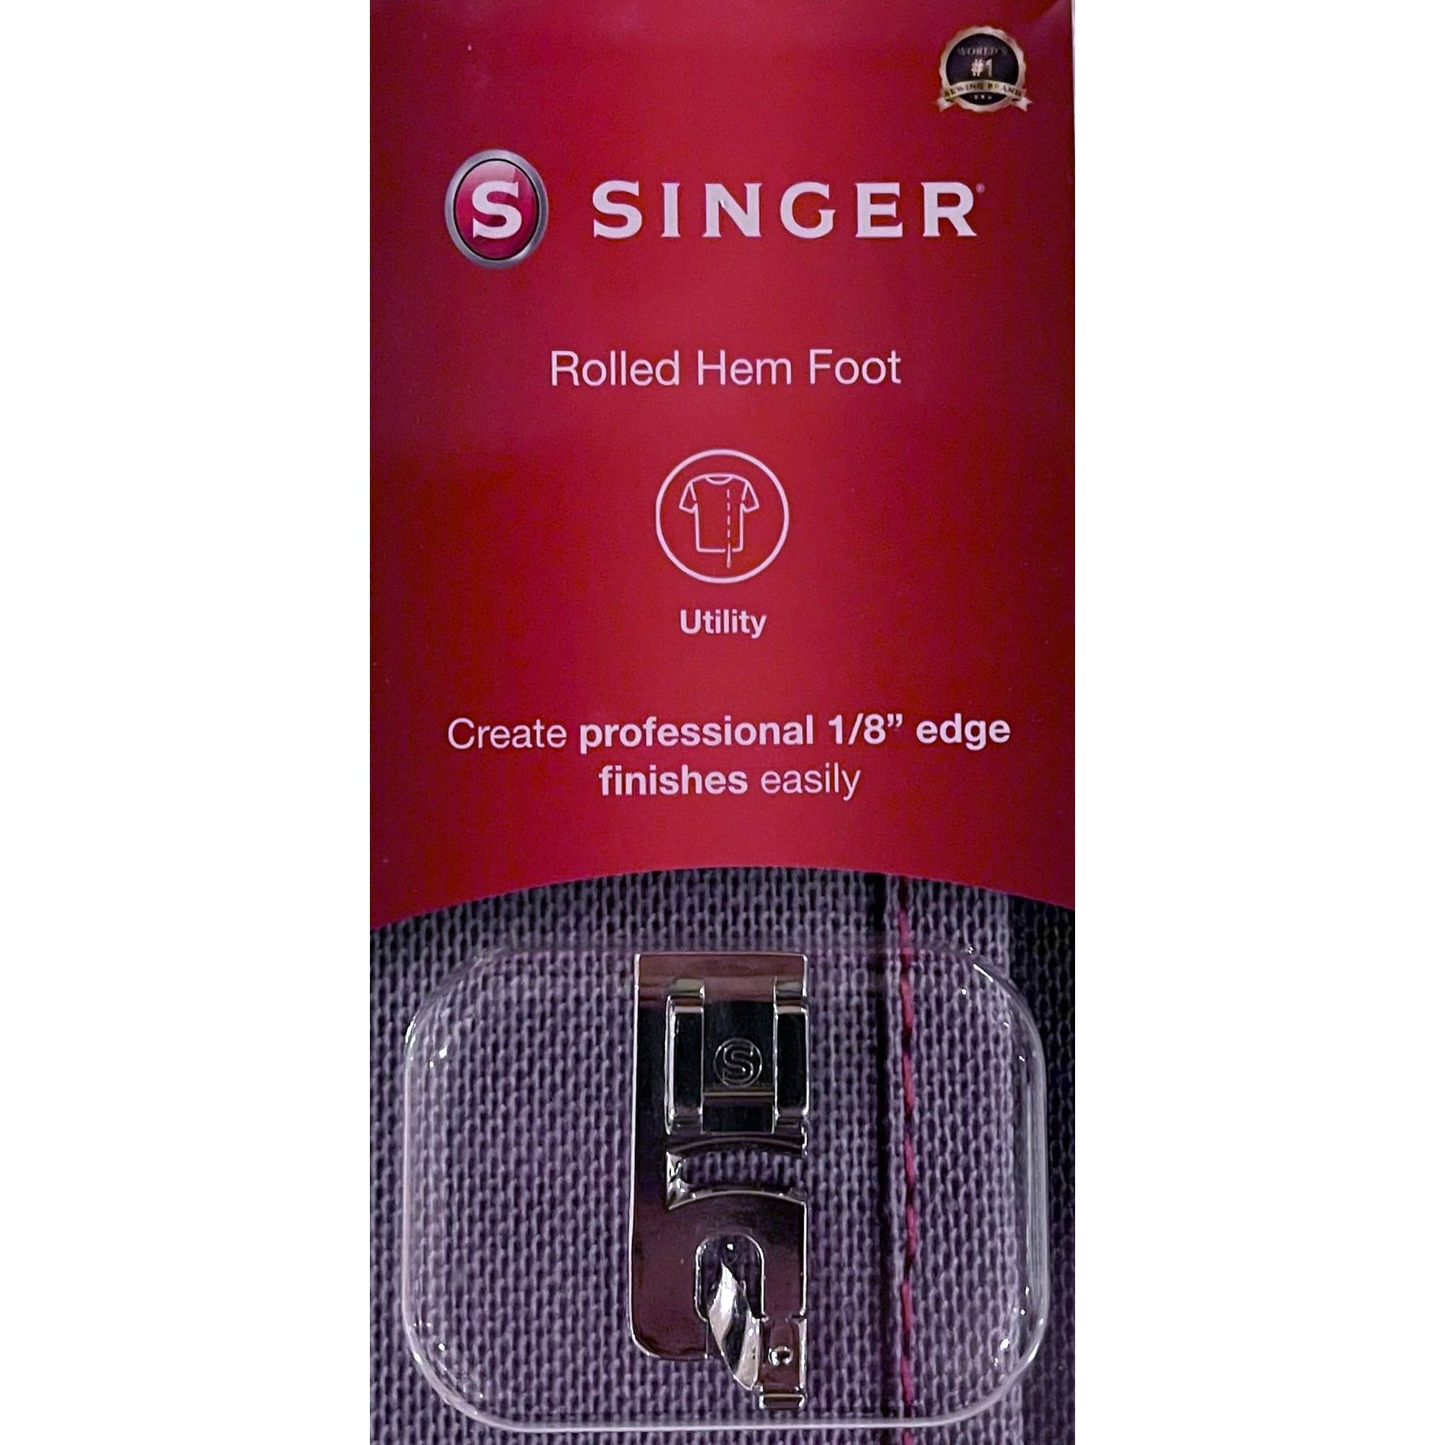 Rolled Hem Foot (1/8inch edge) by Singer